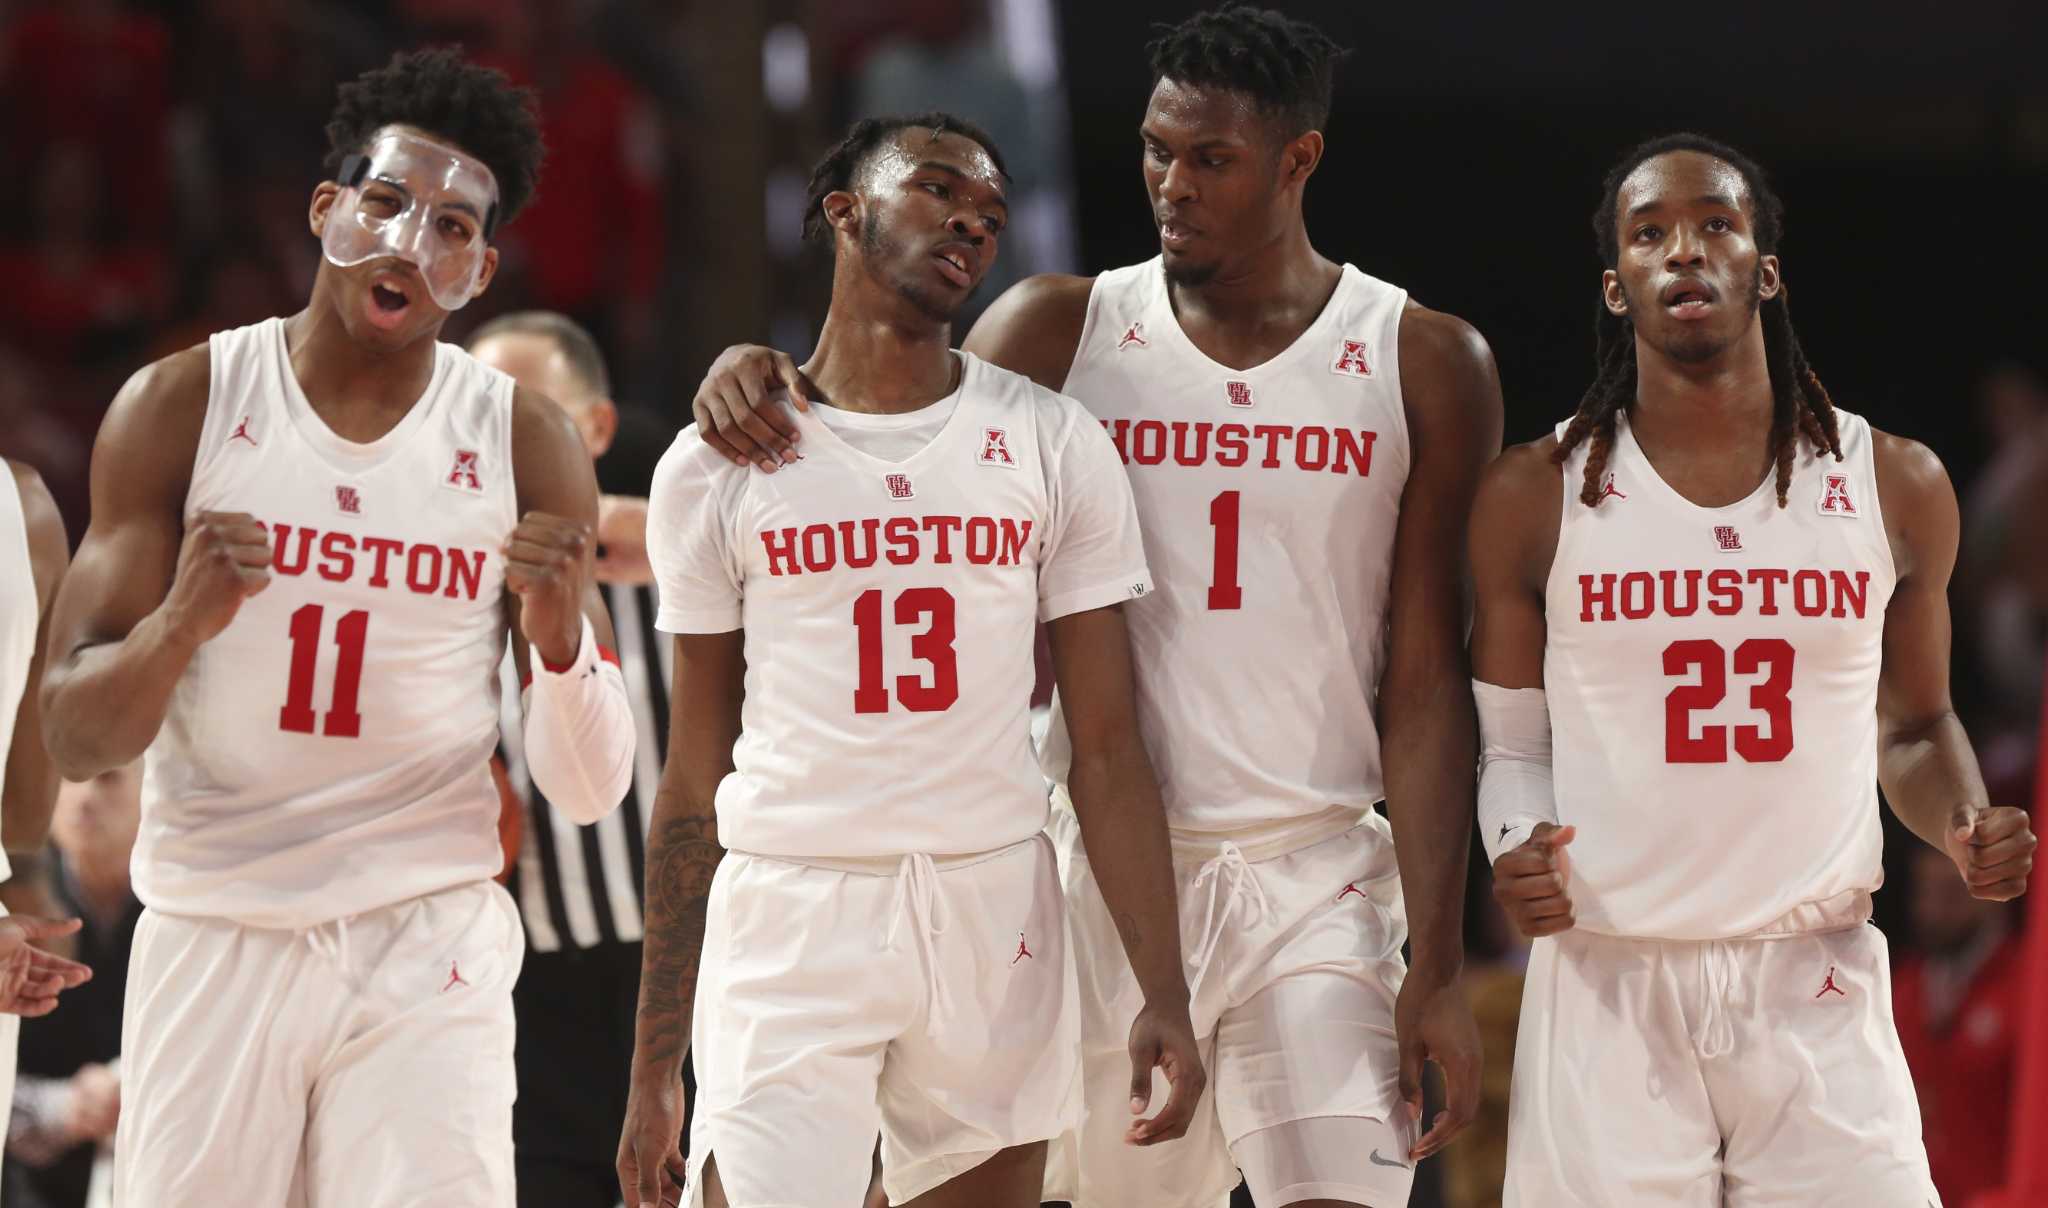 The Houston Cougars are in the Sweet Sixteen for the first time in more than thirty years. (Image: Yi-Chin Lee, Houston Chronicle)